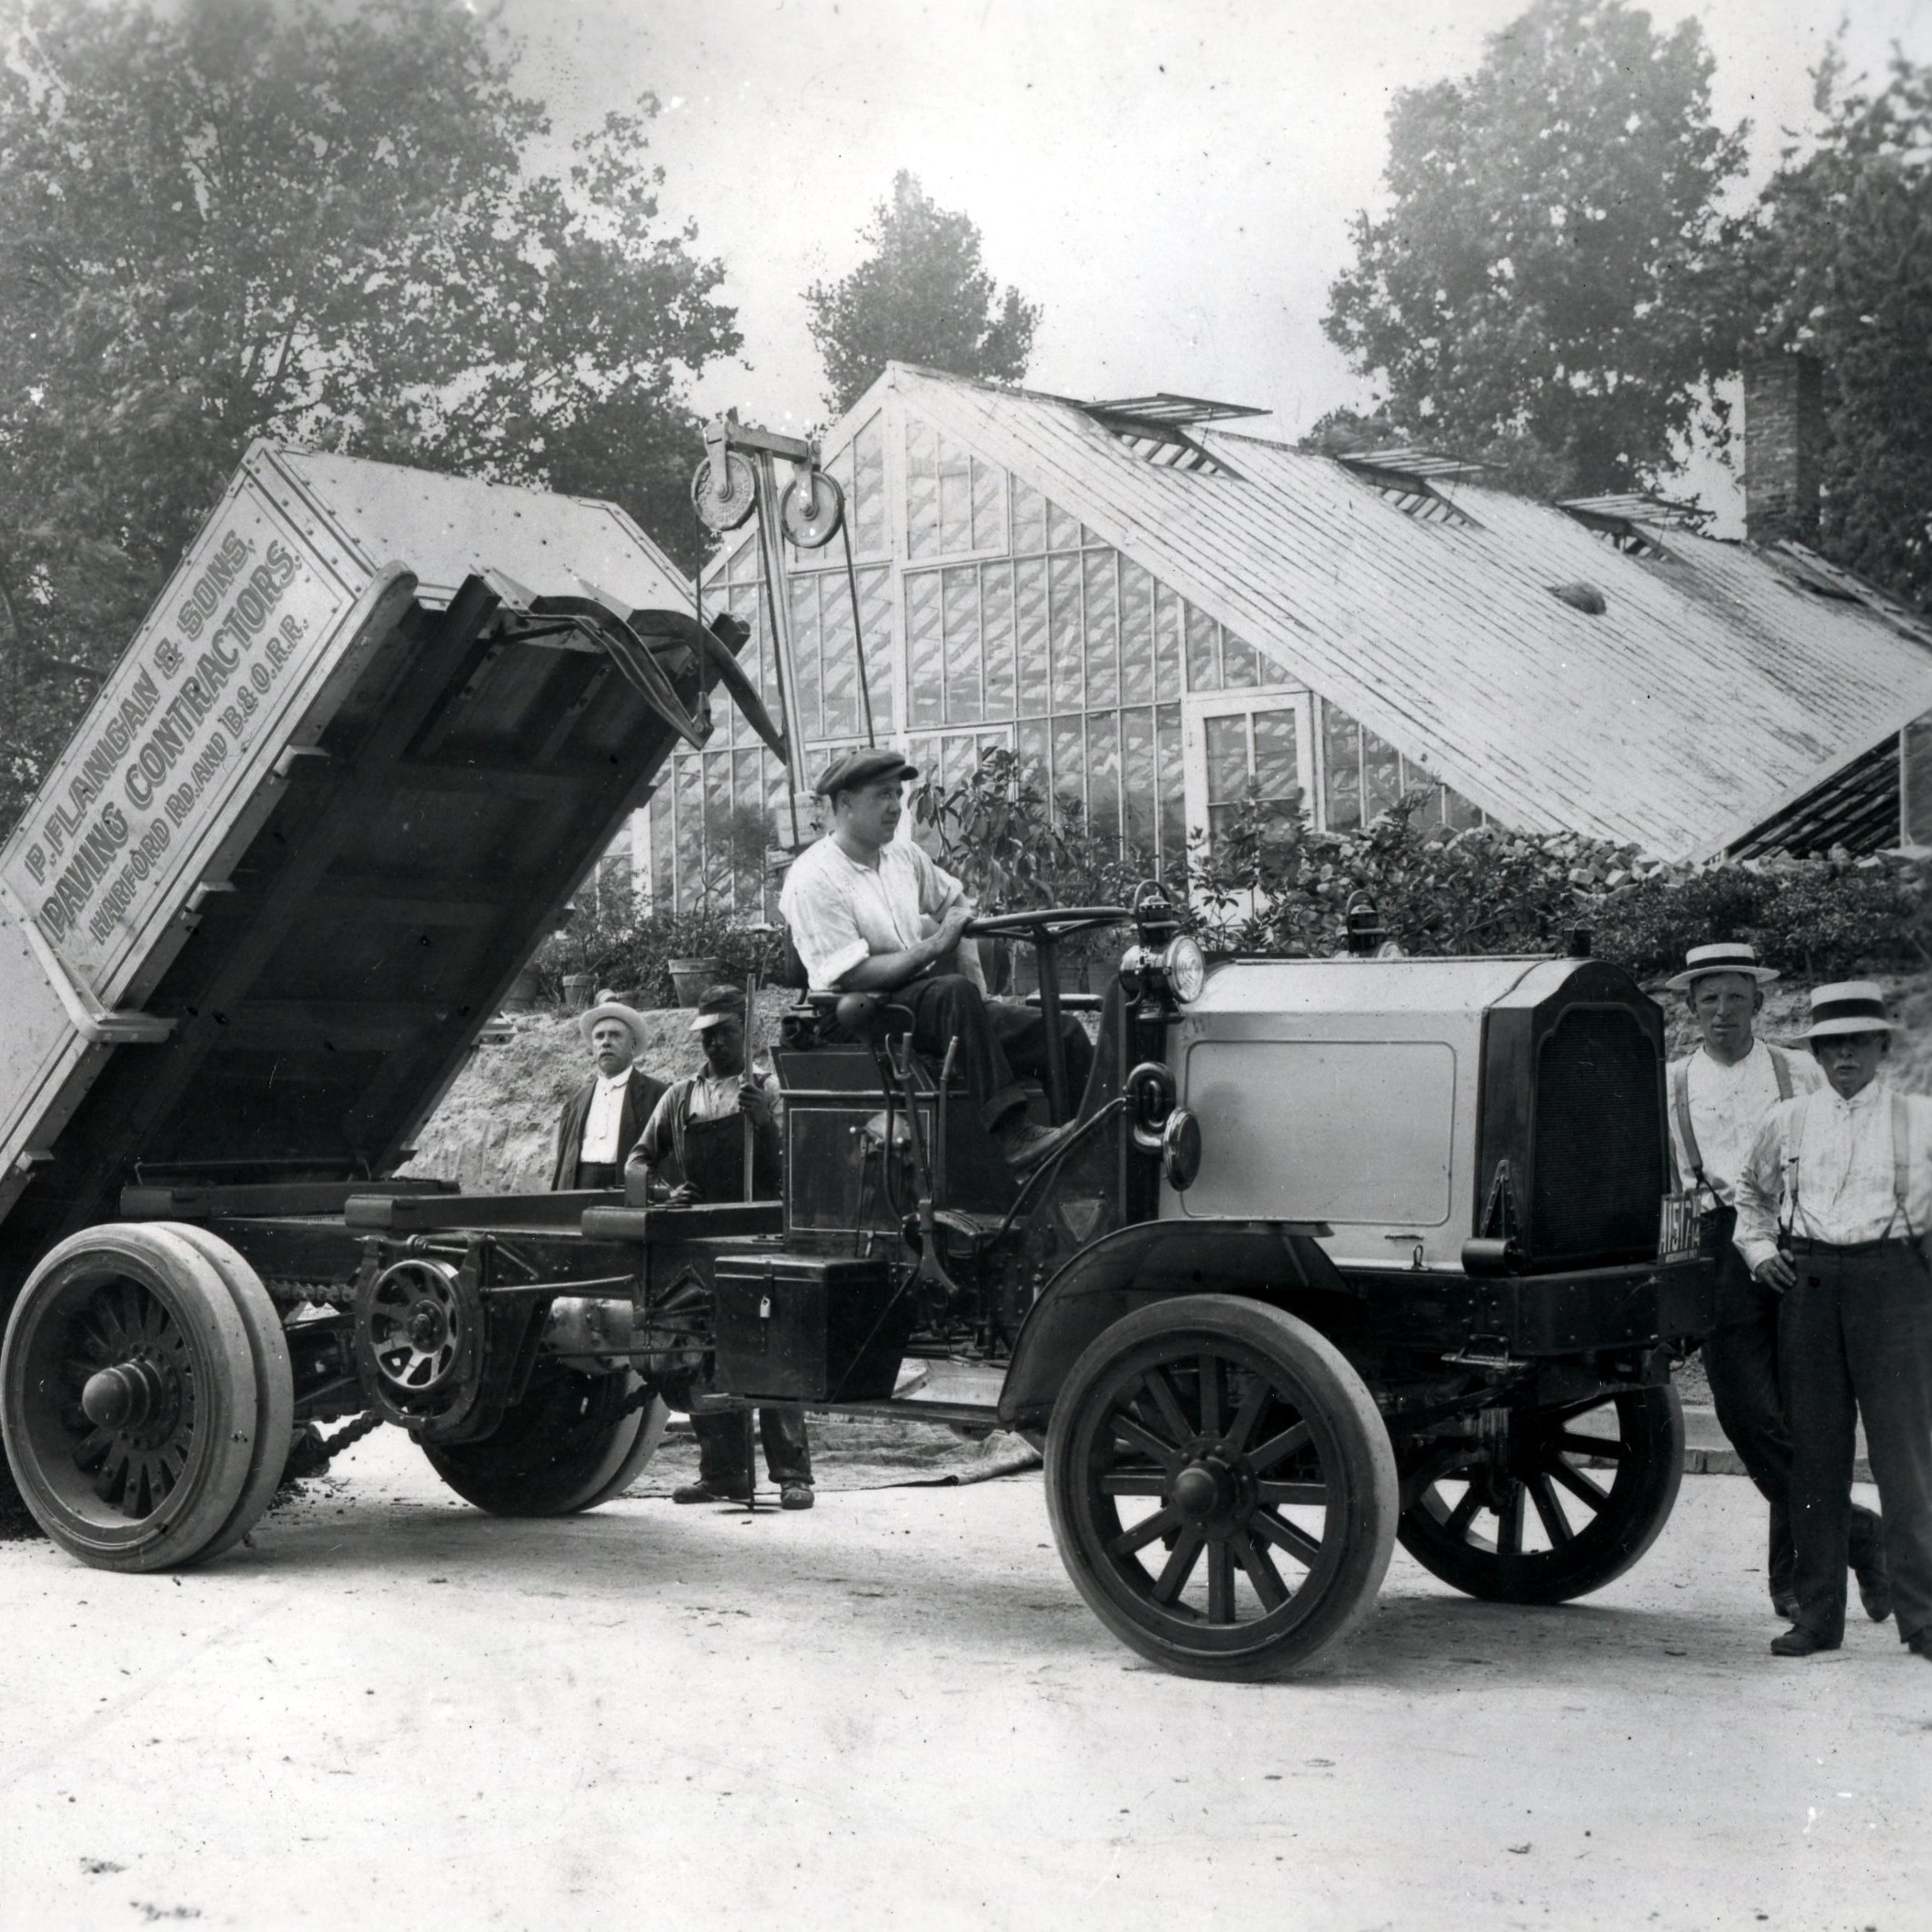 dump truck from 1912 in black and white